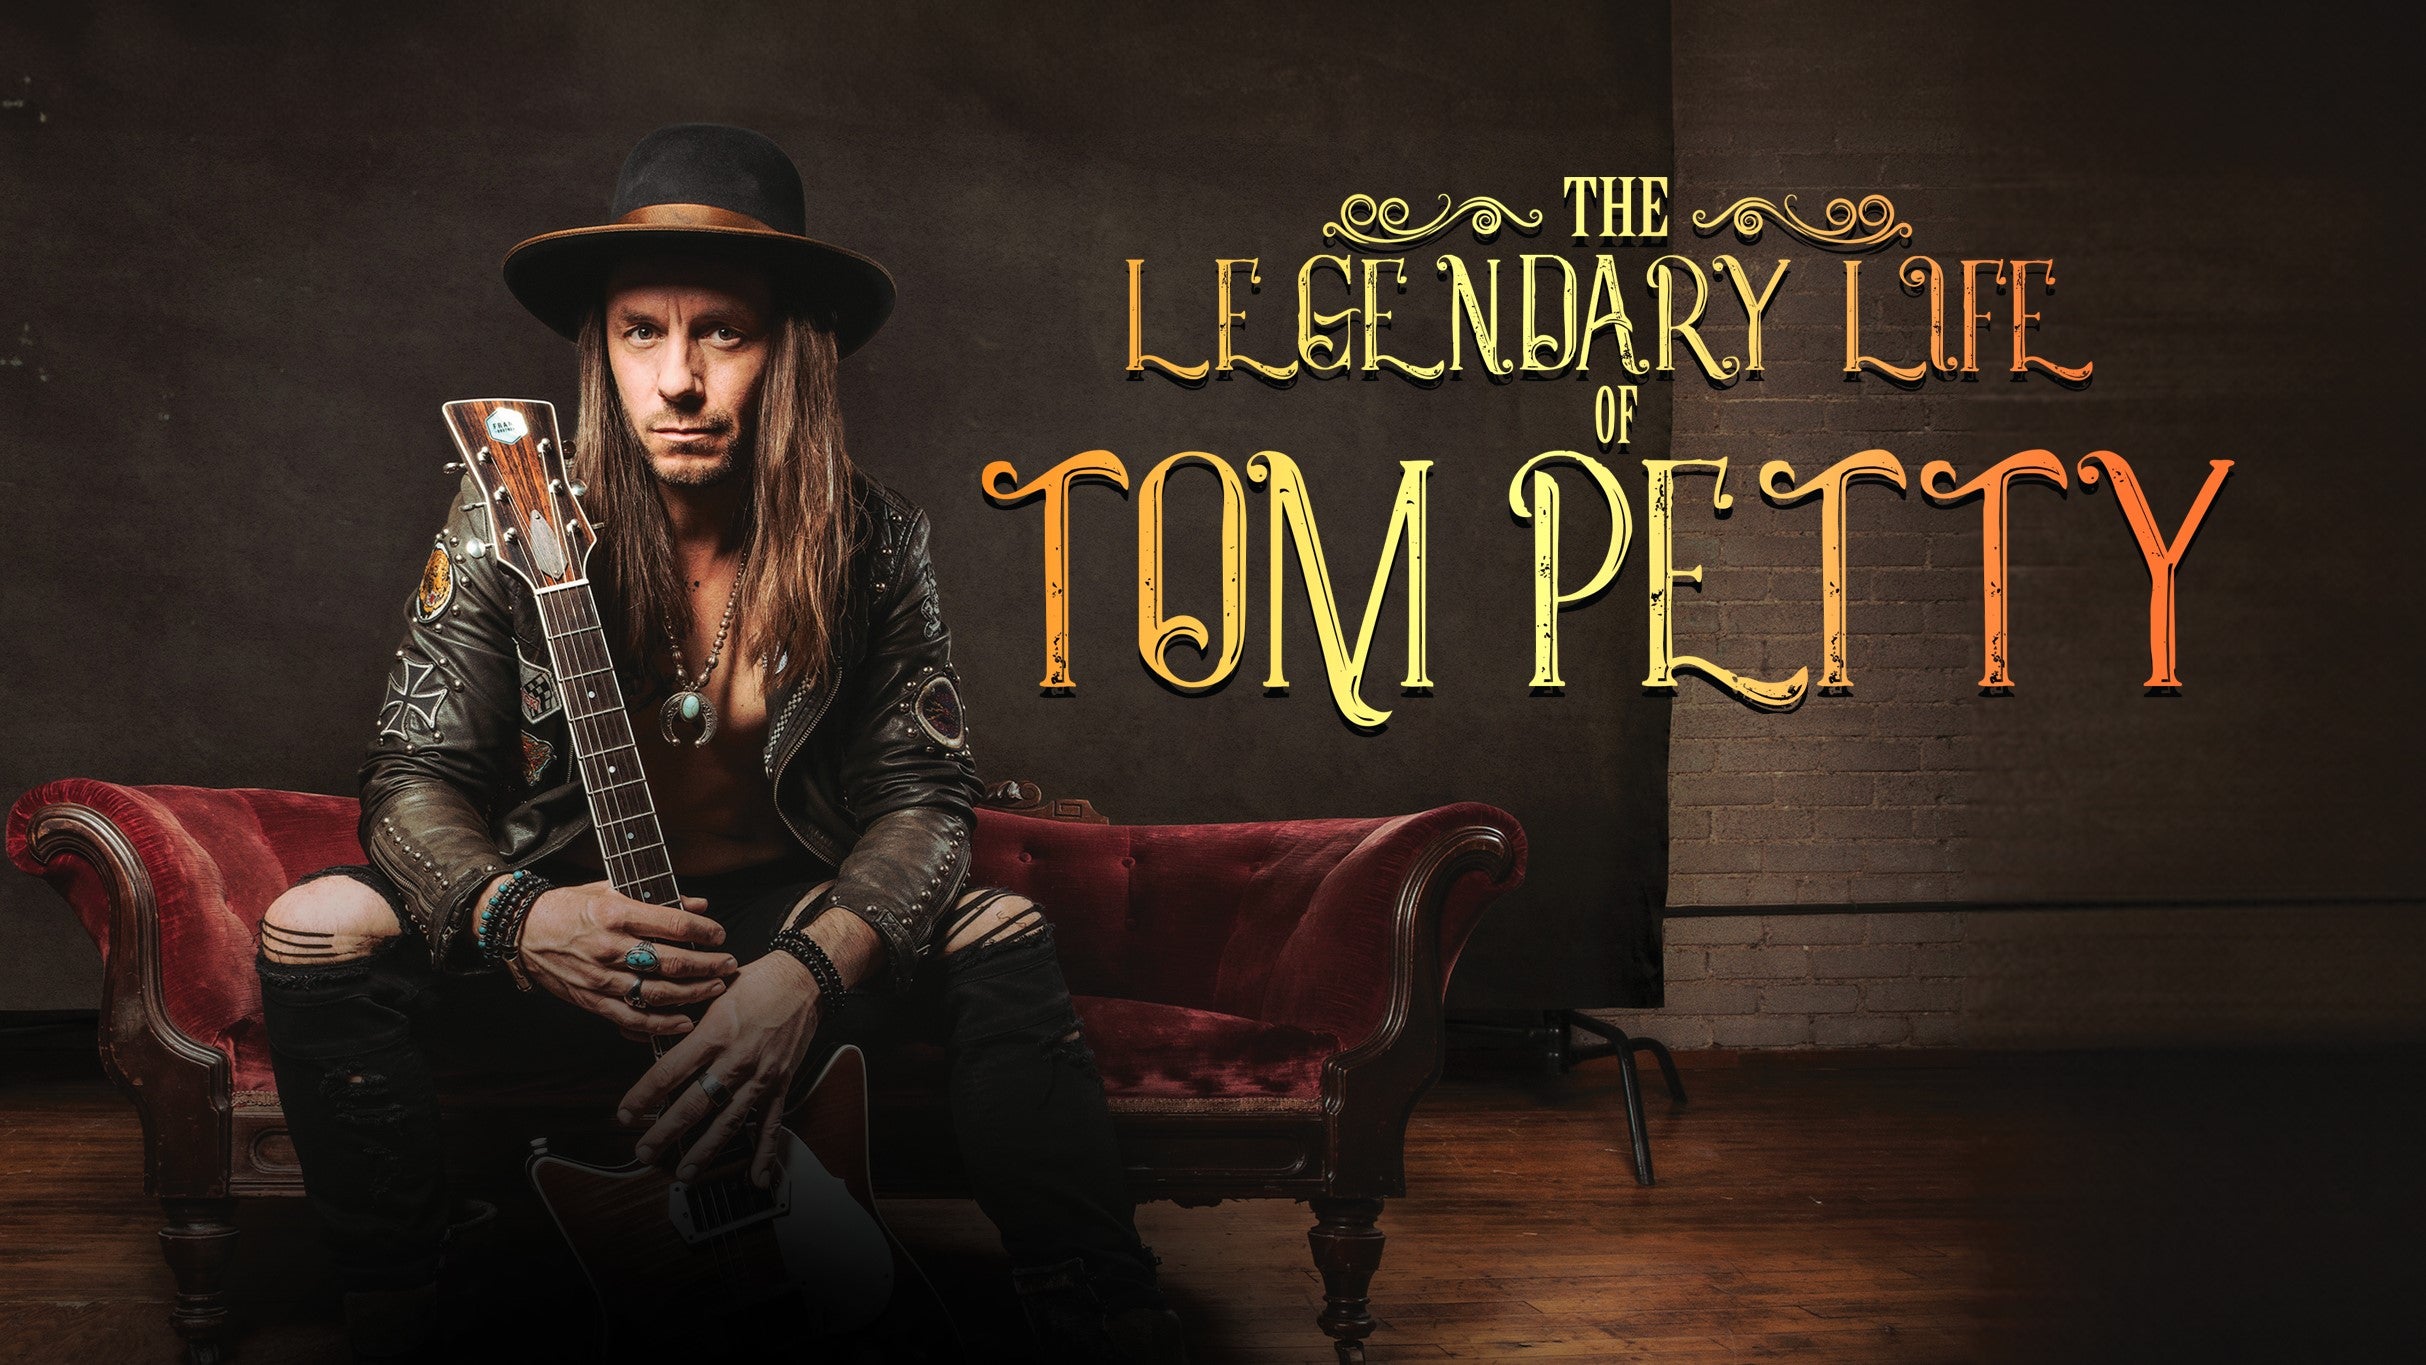 The Legendary Life of Tom Petty featuring Clayton Bellamy in Edmonton promo photo for Exclusive presale offer code